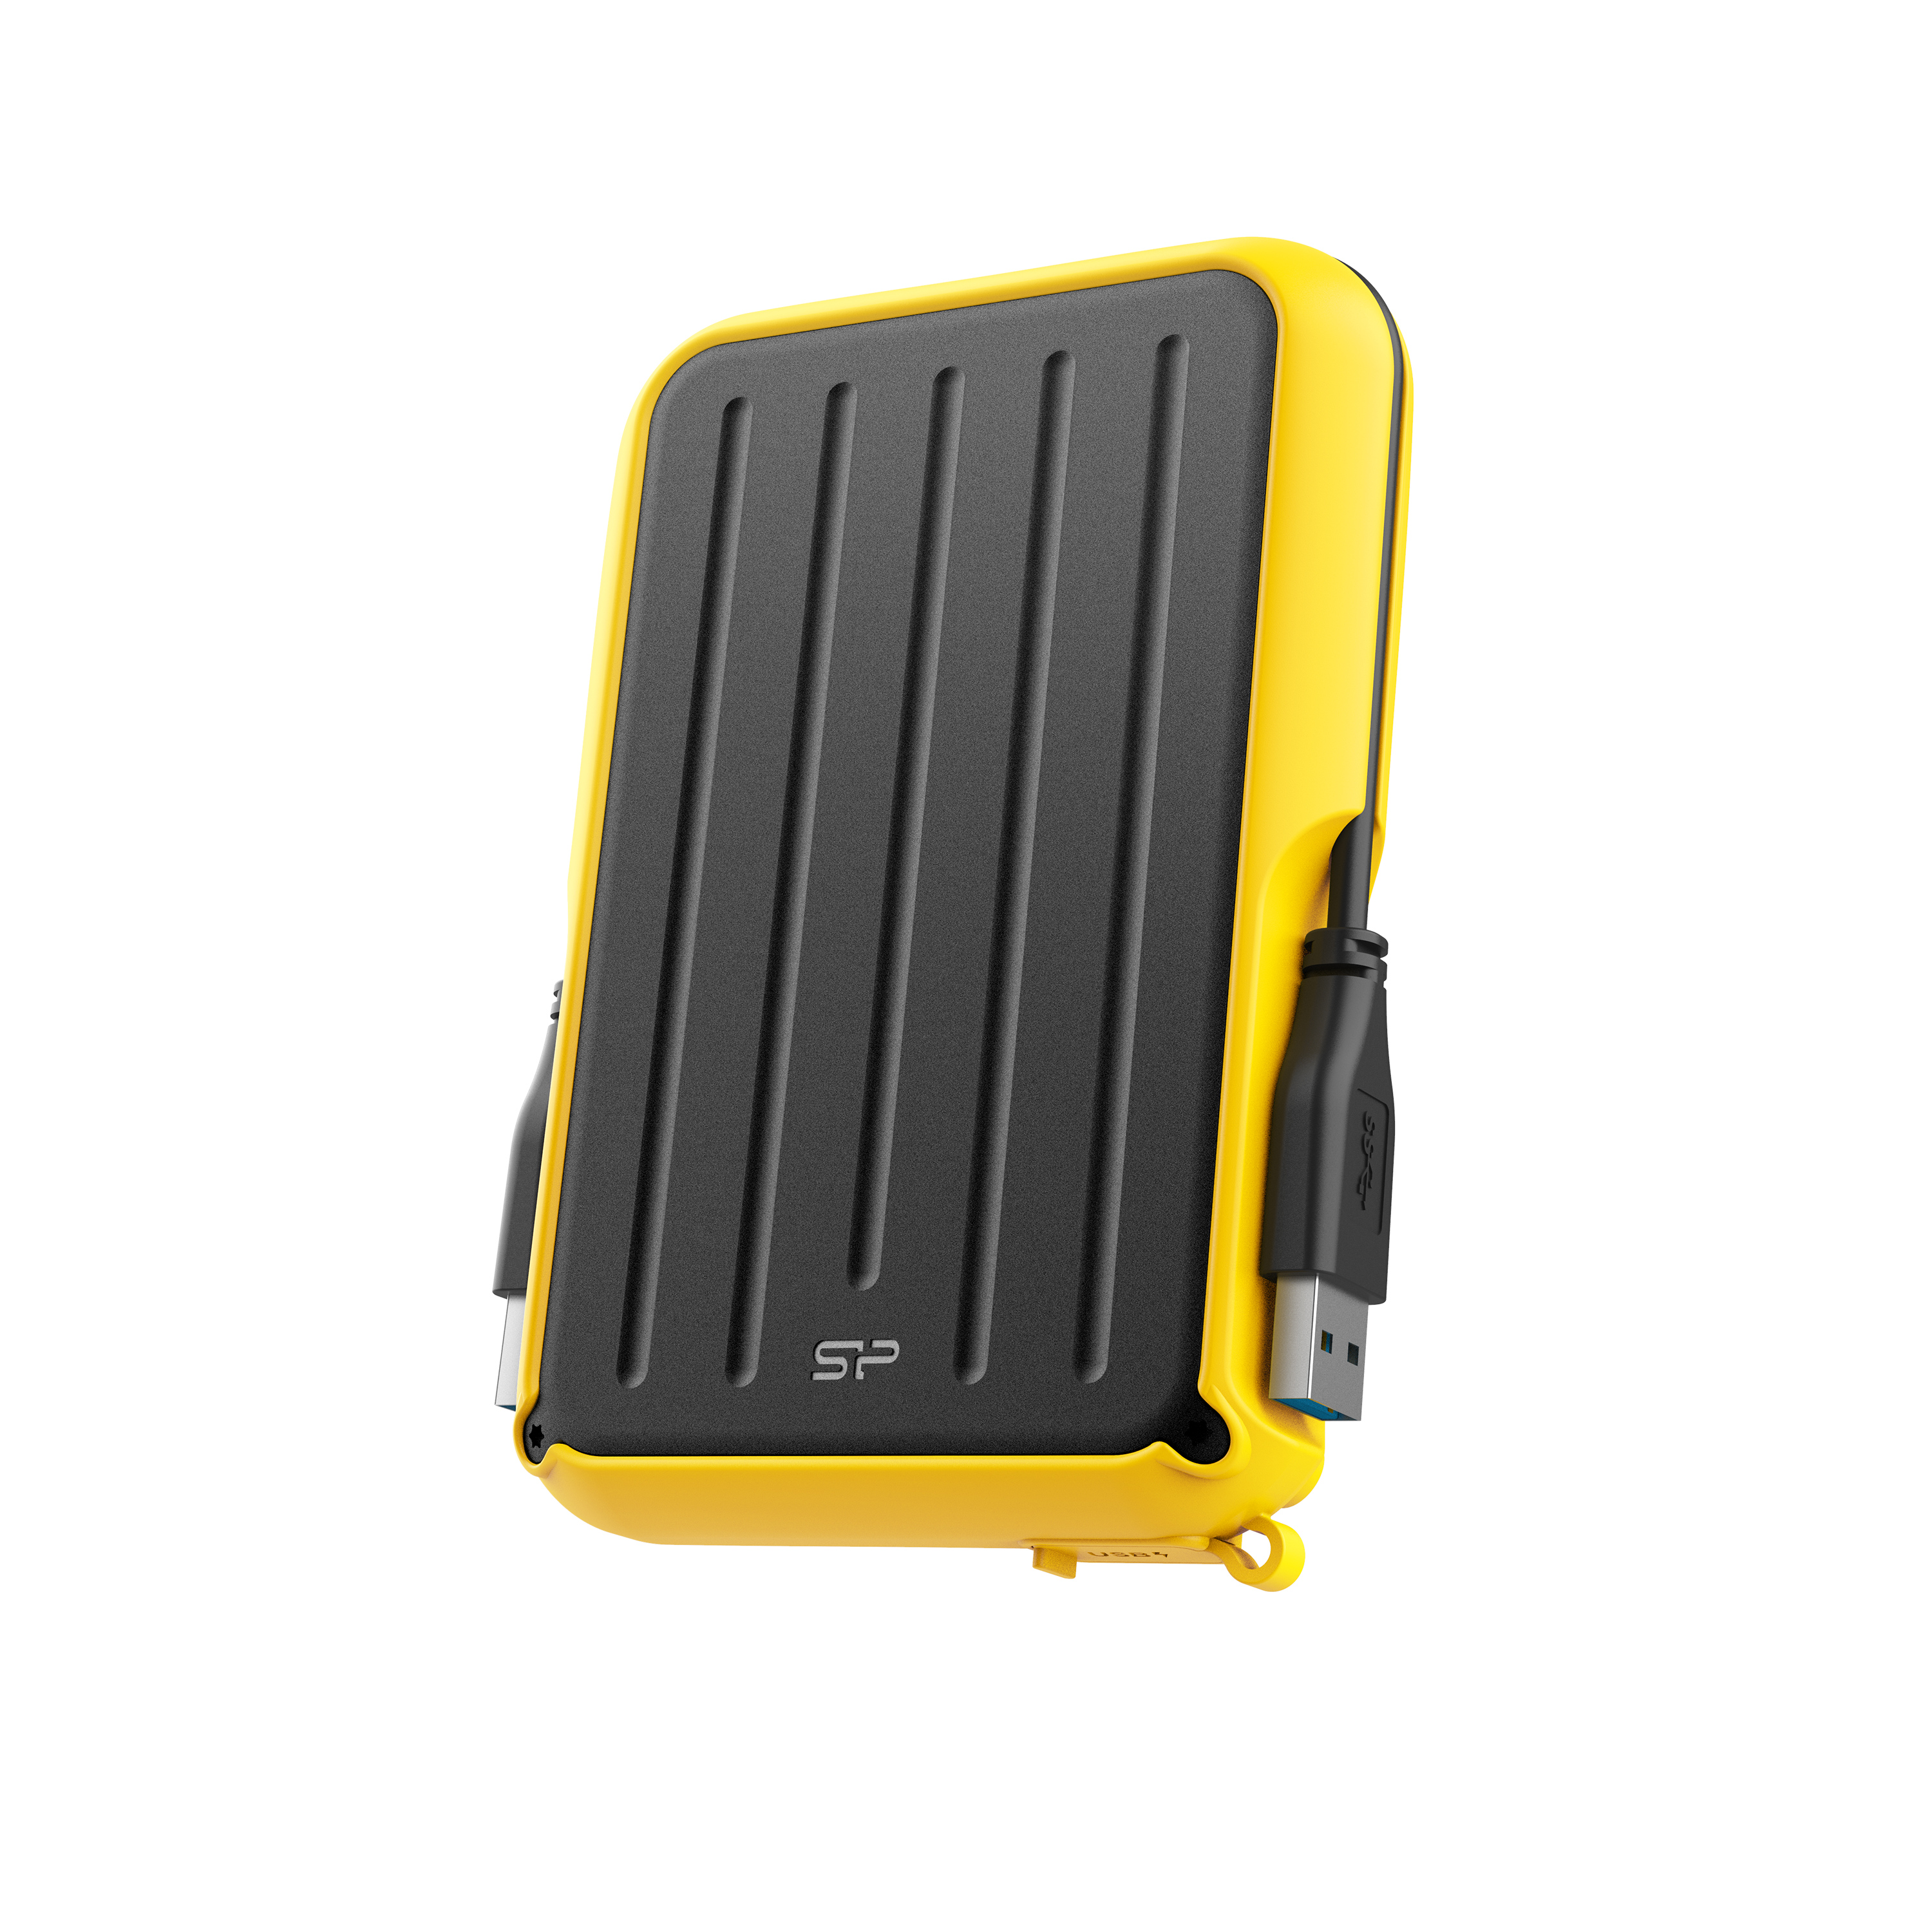 Silicon Power 5TB Armor A66 Rugged Shockproof & Water resistant Portable External Hard Drive USB 3.0 - Yellow